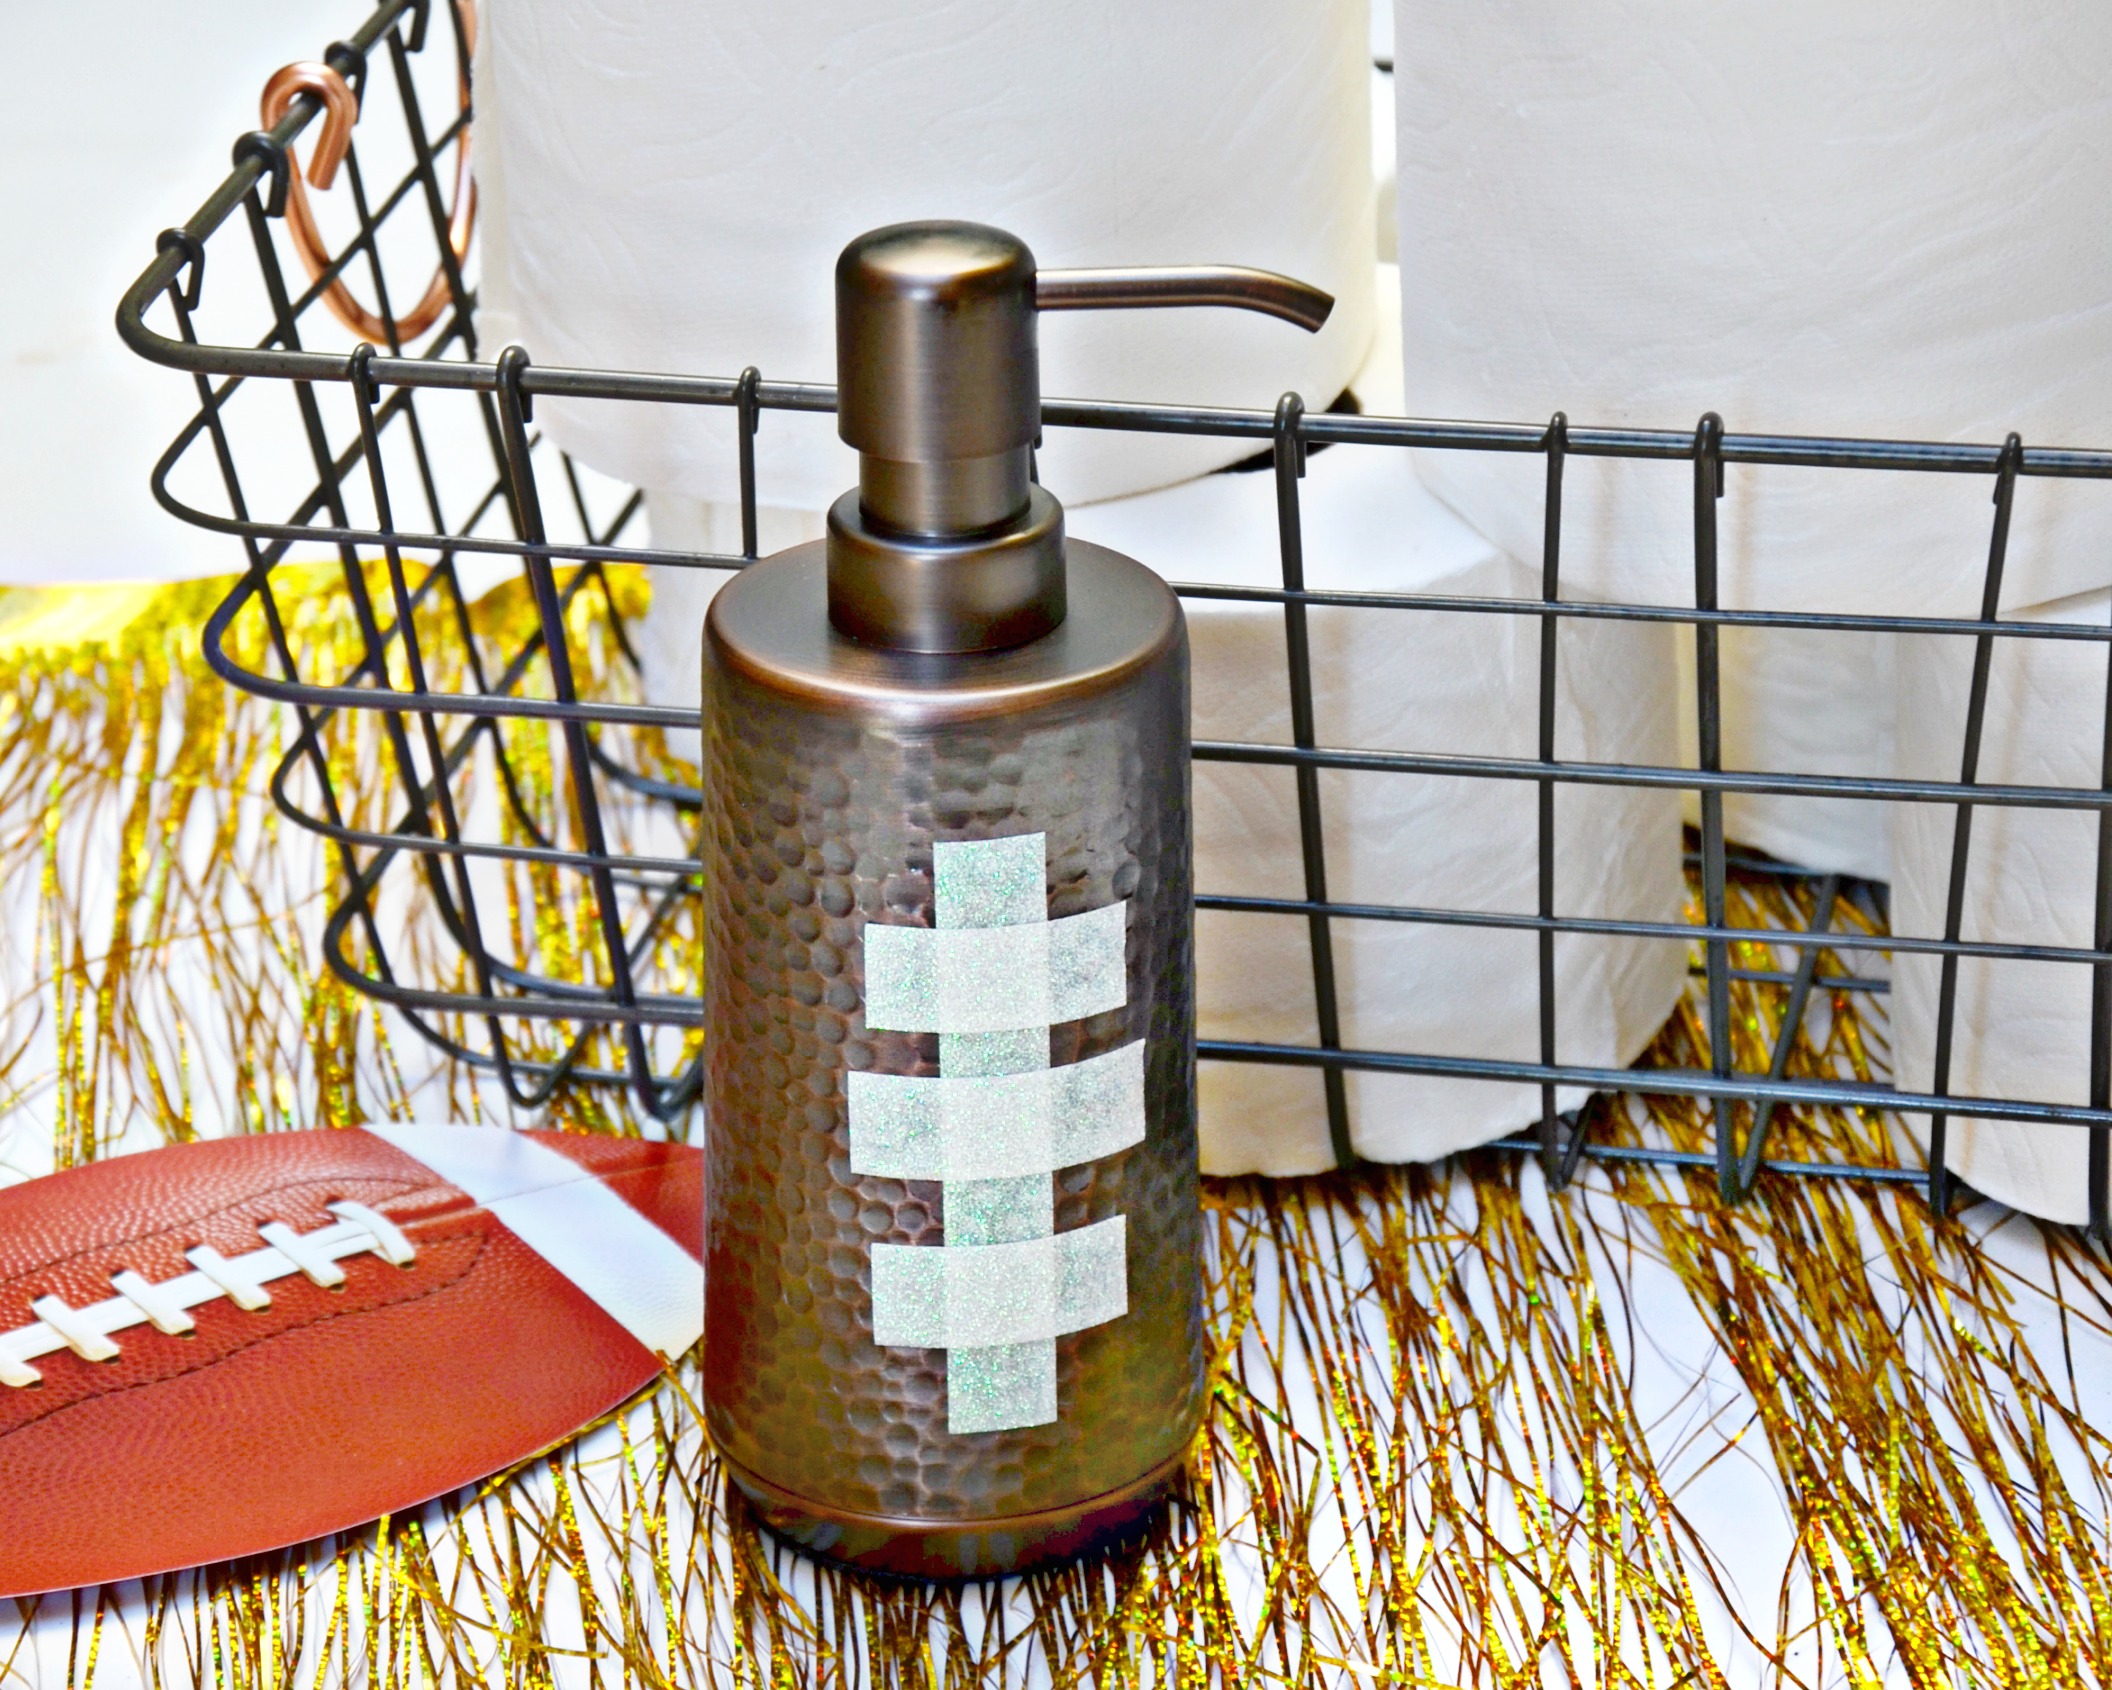 football soap dispenser and toilet paper